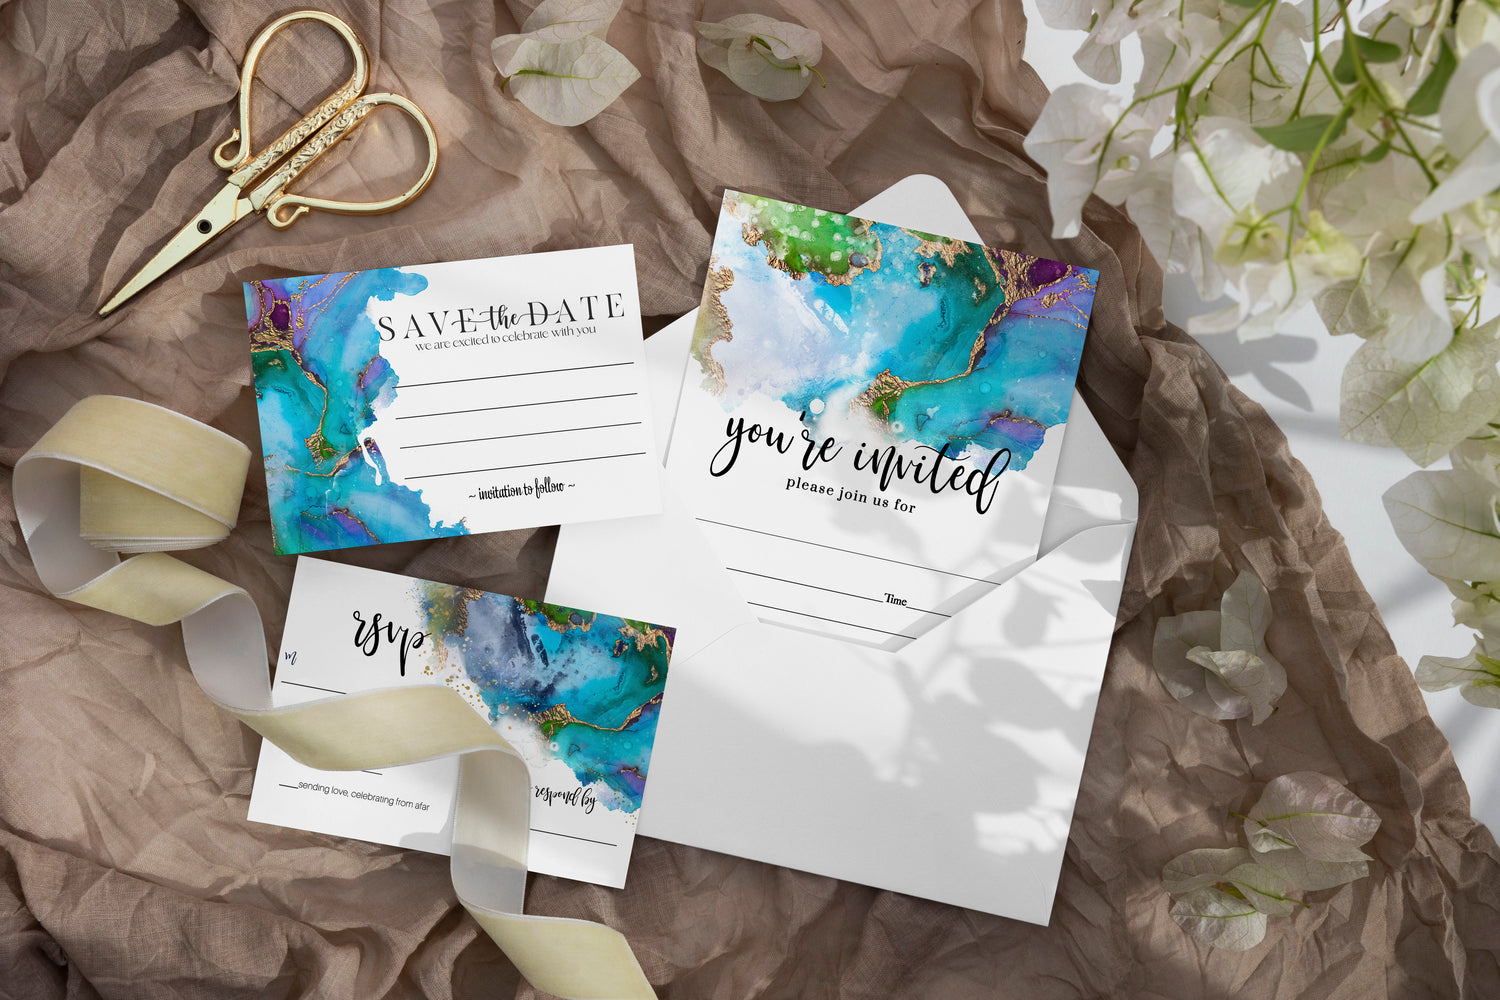 Step into a world of elegance with our watercolor jeweled wedding collection, where teal and purple meet touches of gold